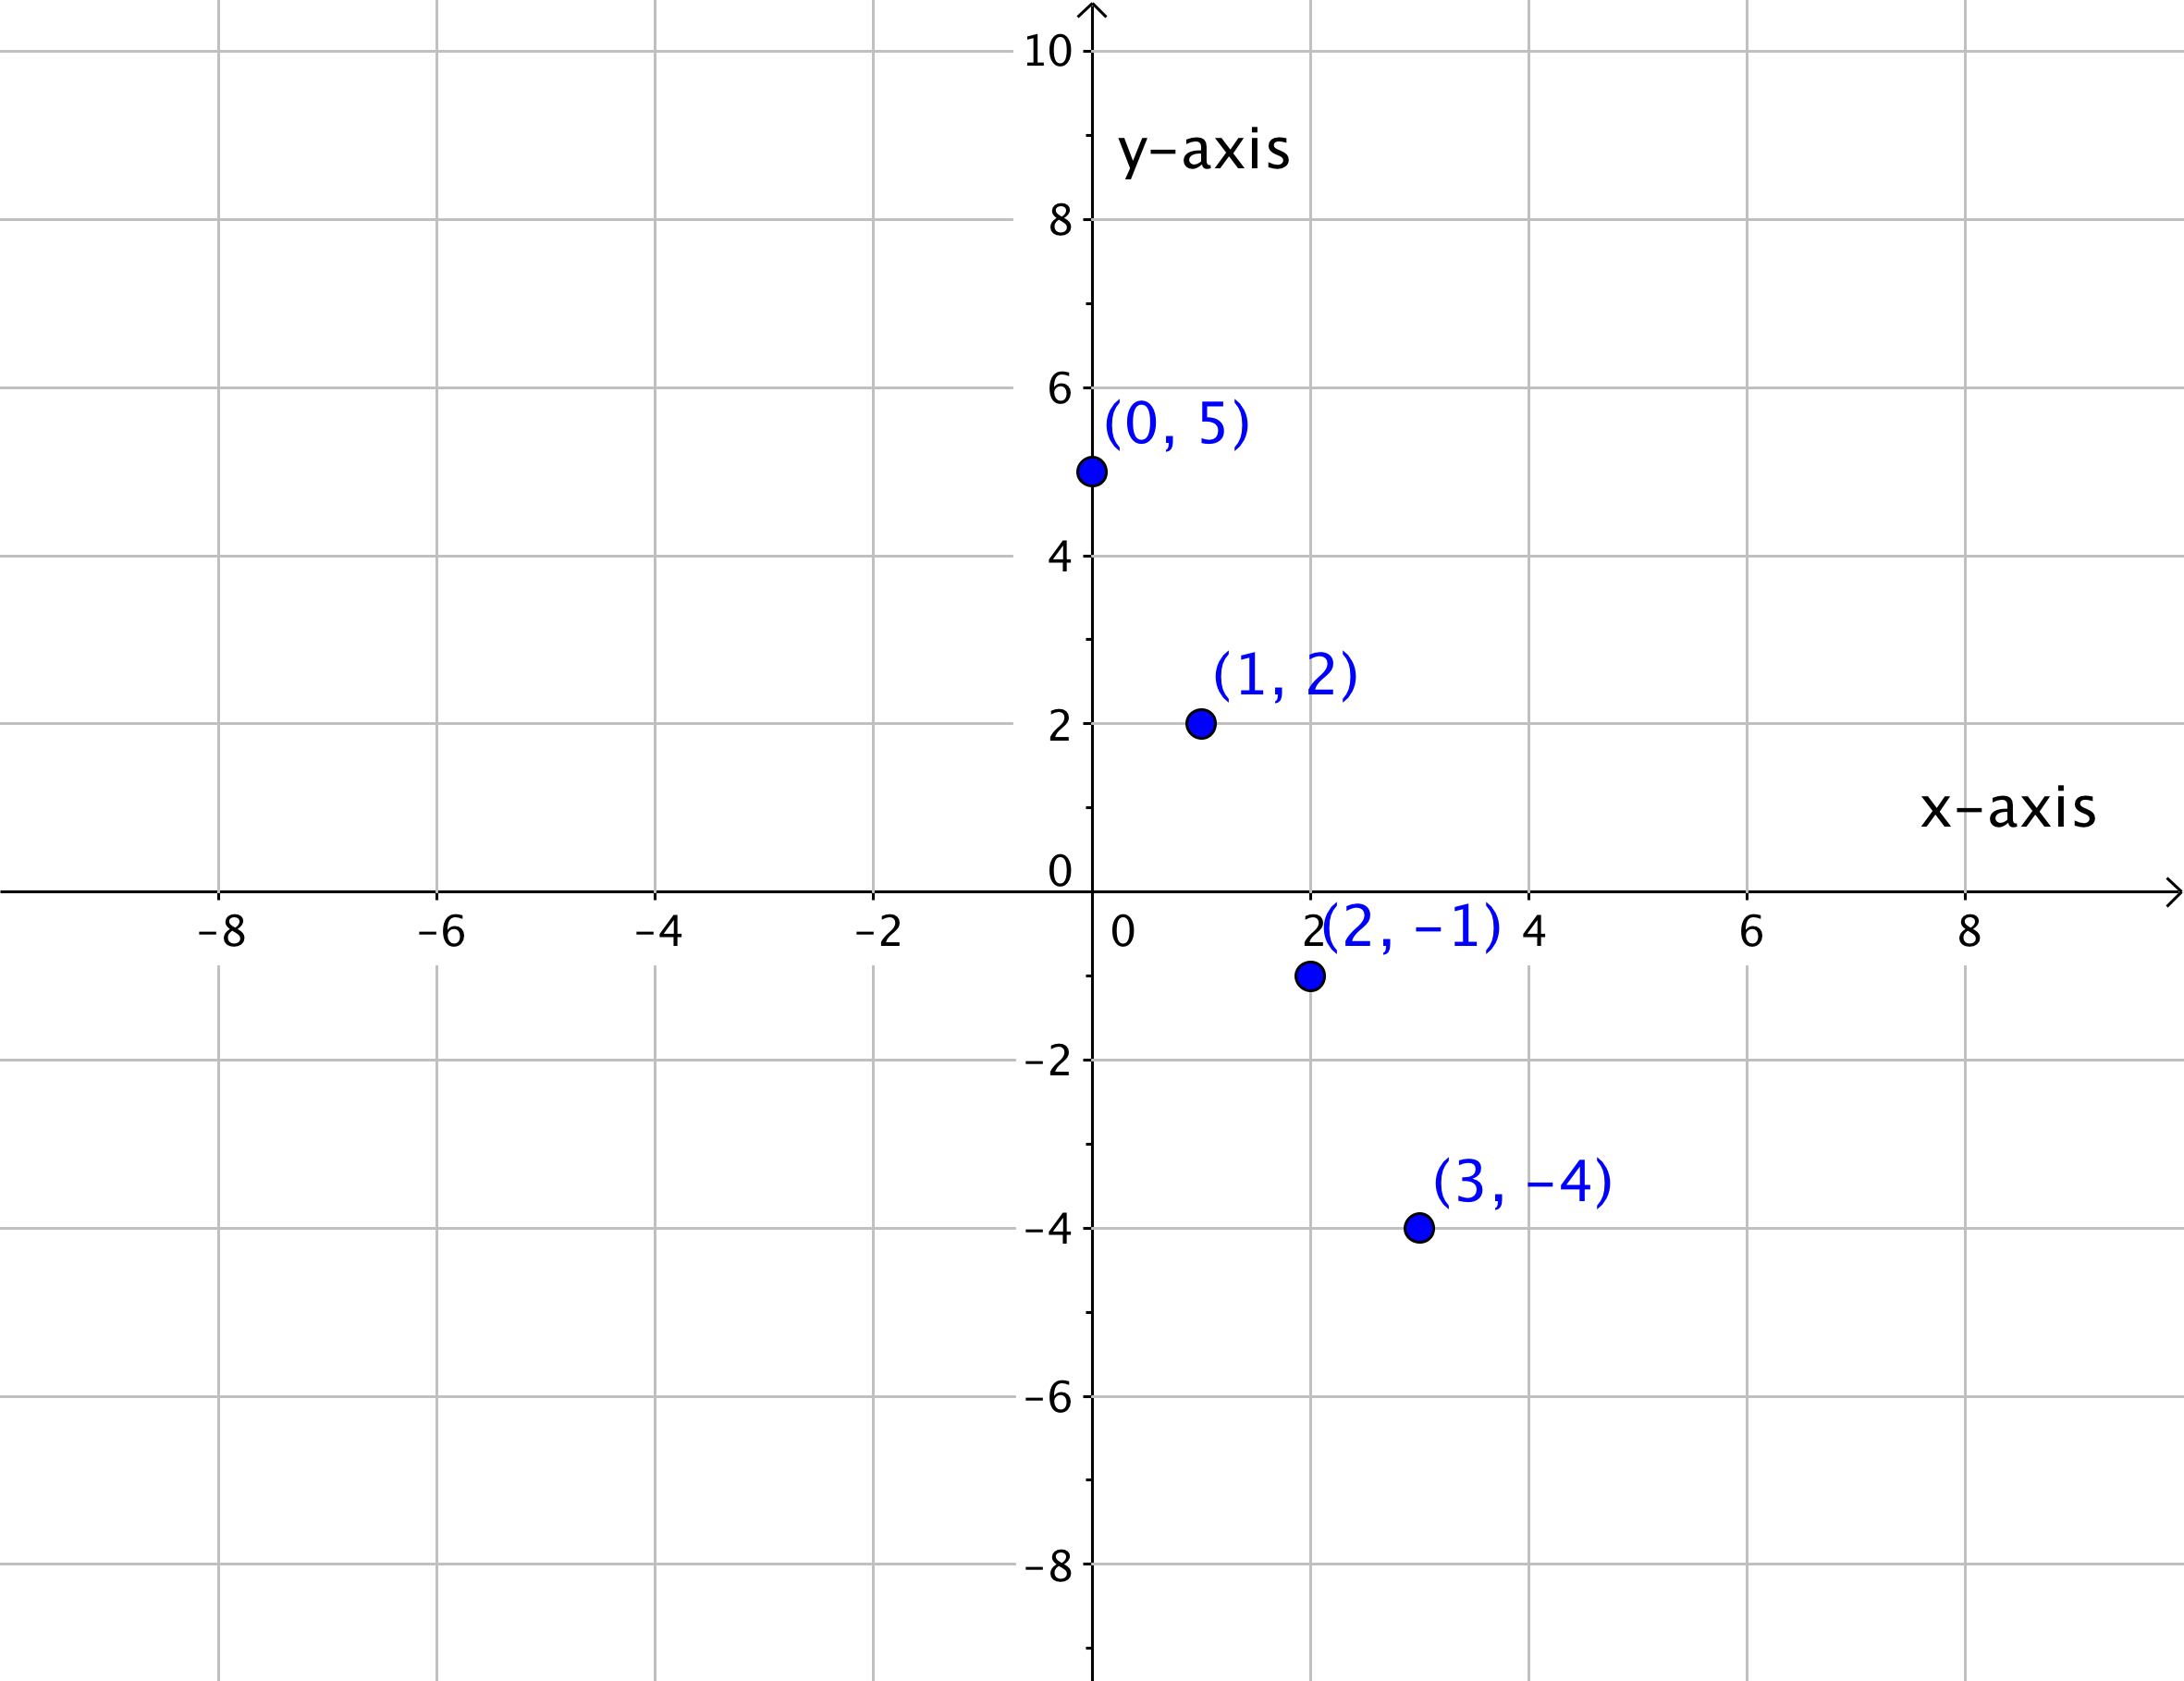 Graph showing the point (0,5), the point (1,2), the point (2,-1), and the point (3,-4).